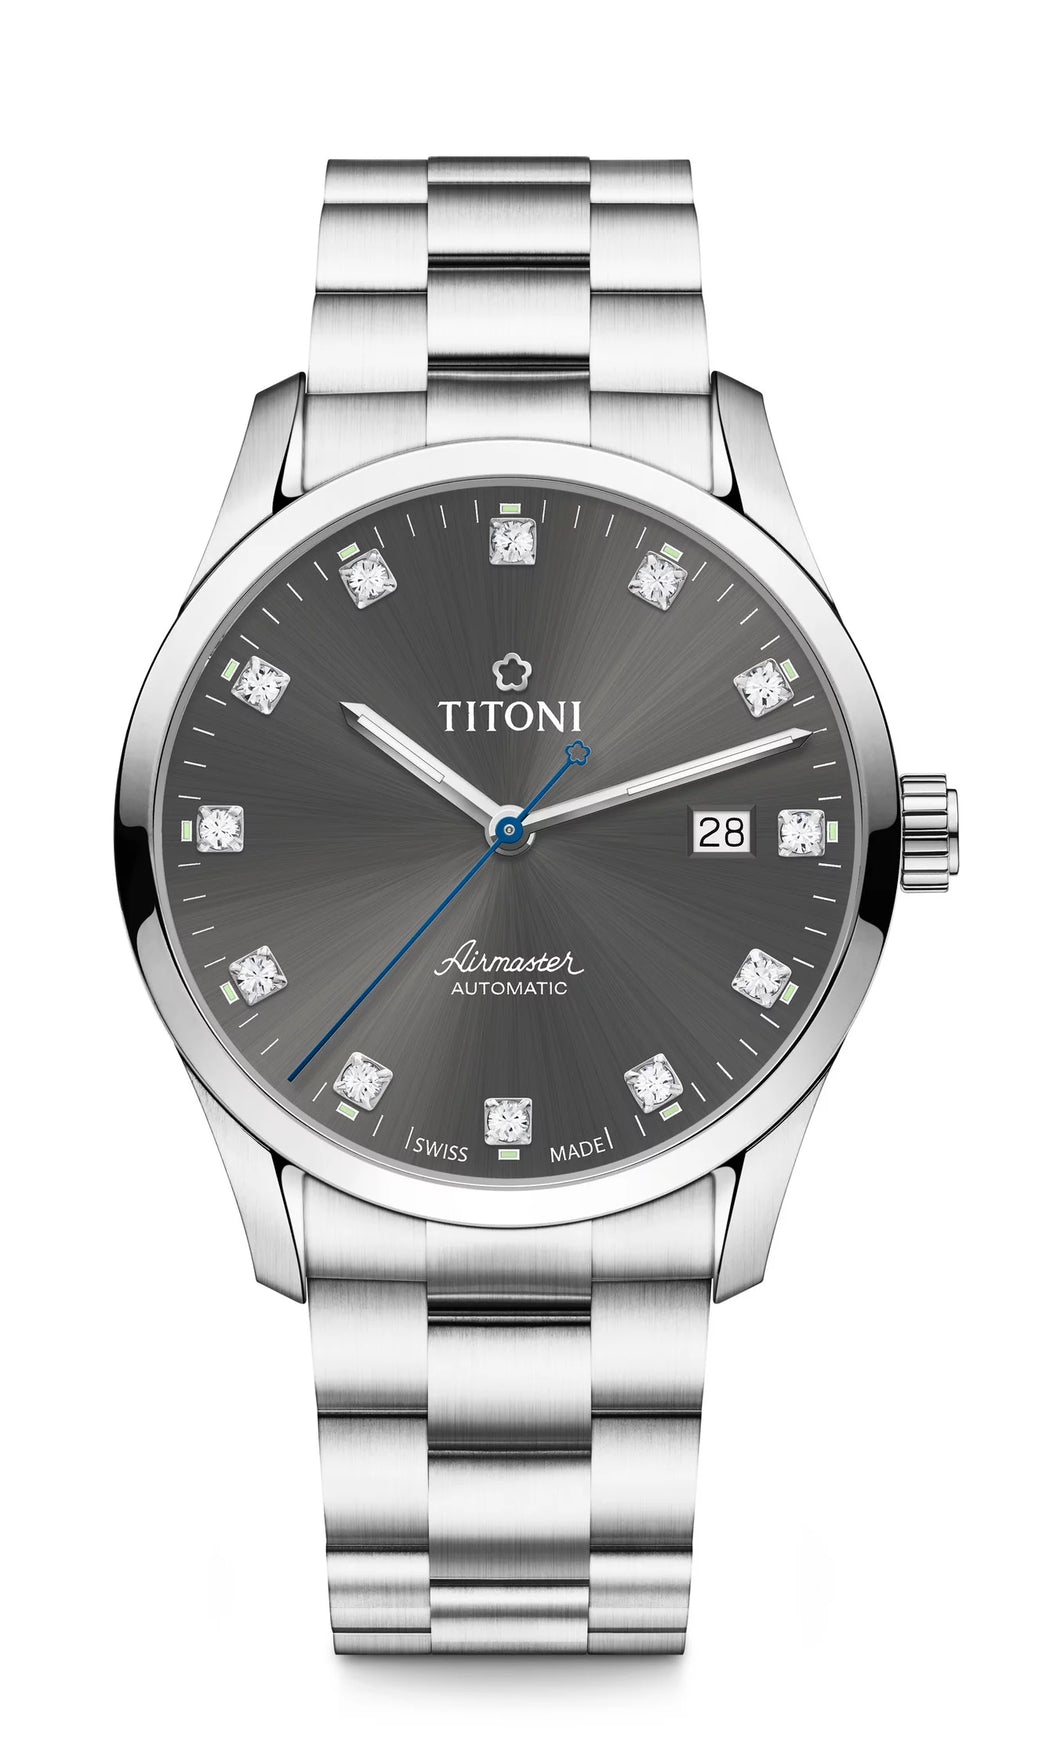 TITONI Airmaster Gents Automatic 83743 S-667